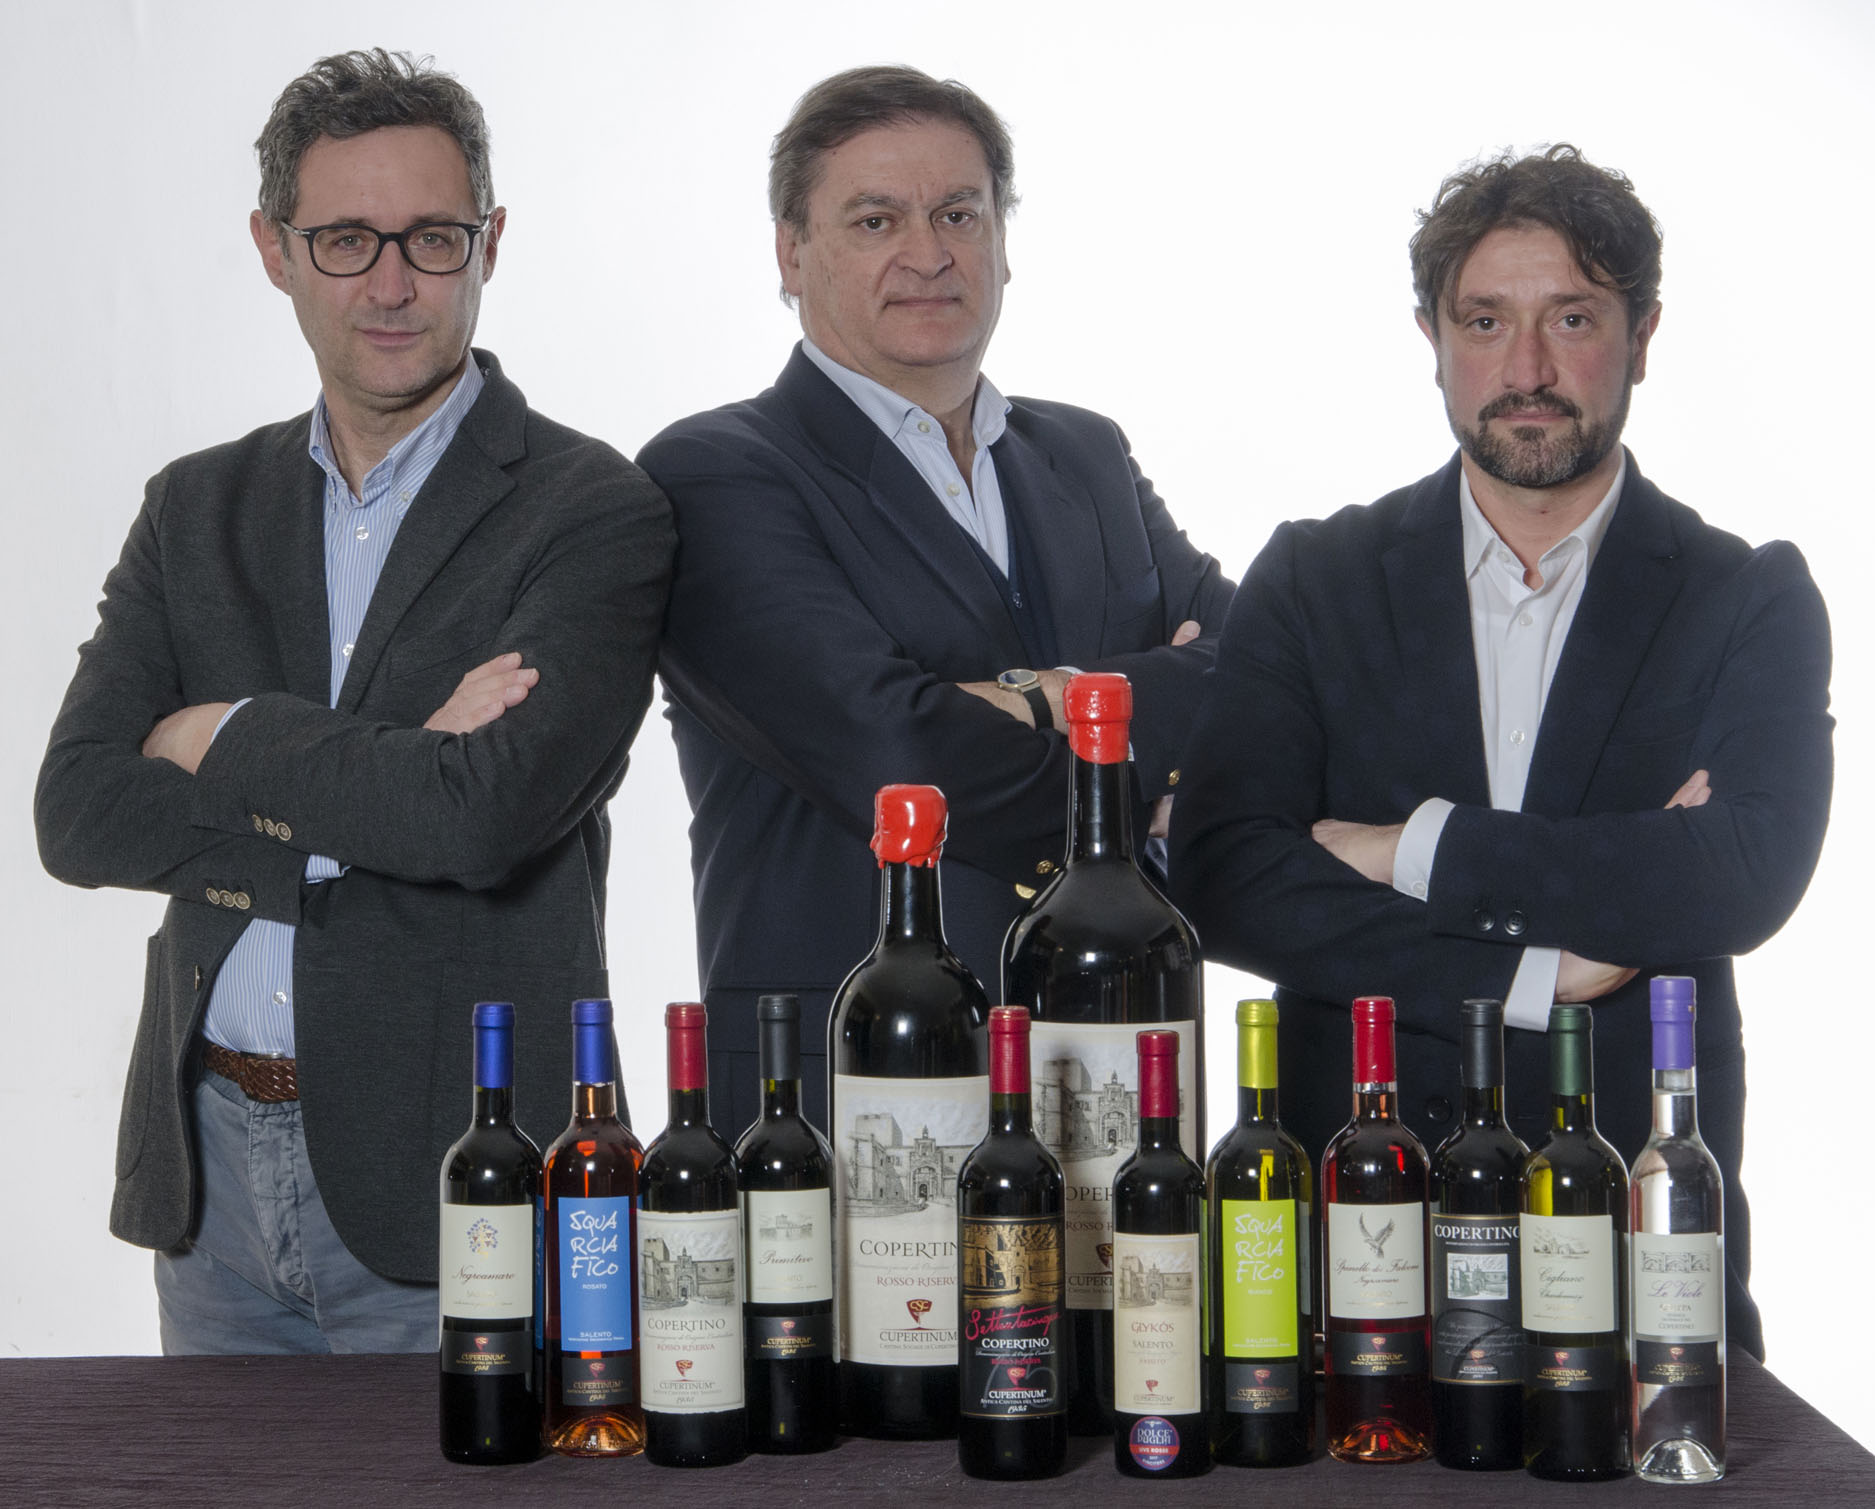 Cupertinum: “… a repertoire of wines of rare quality”